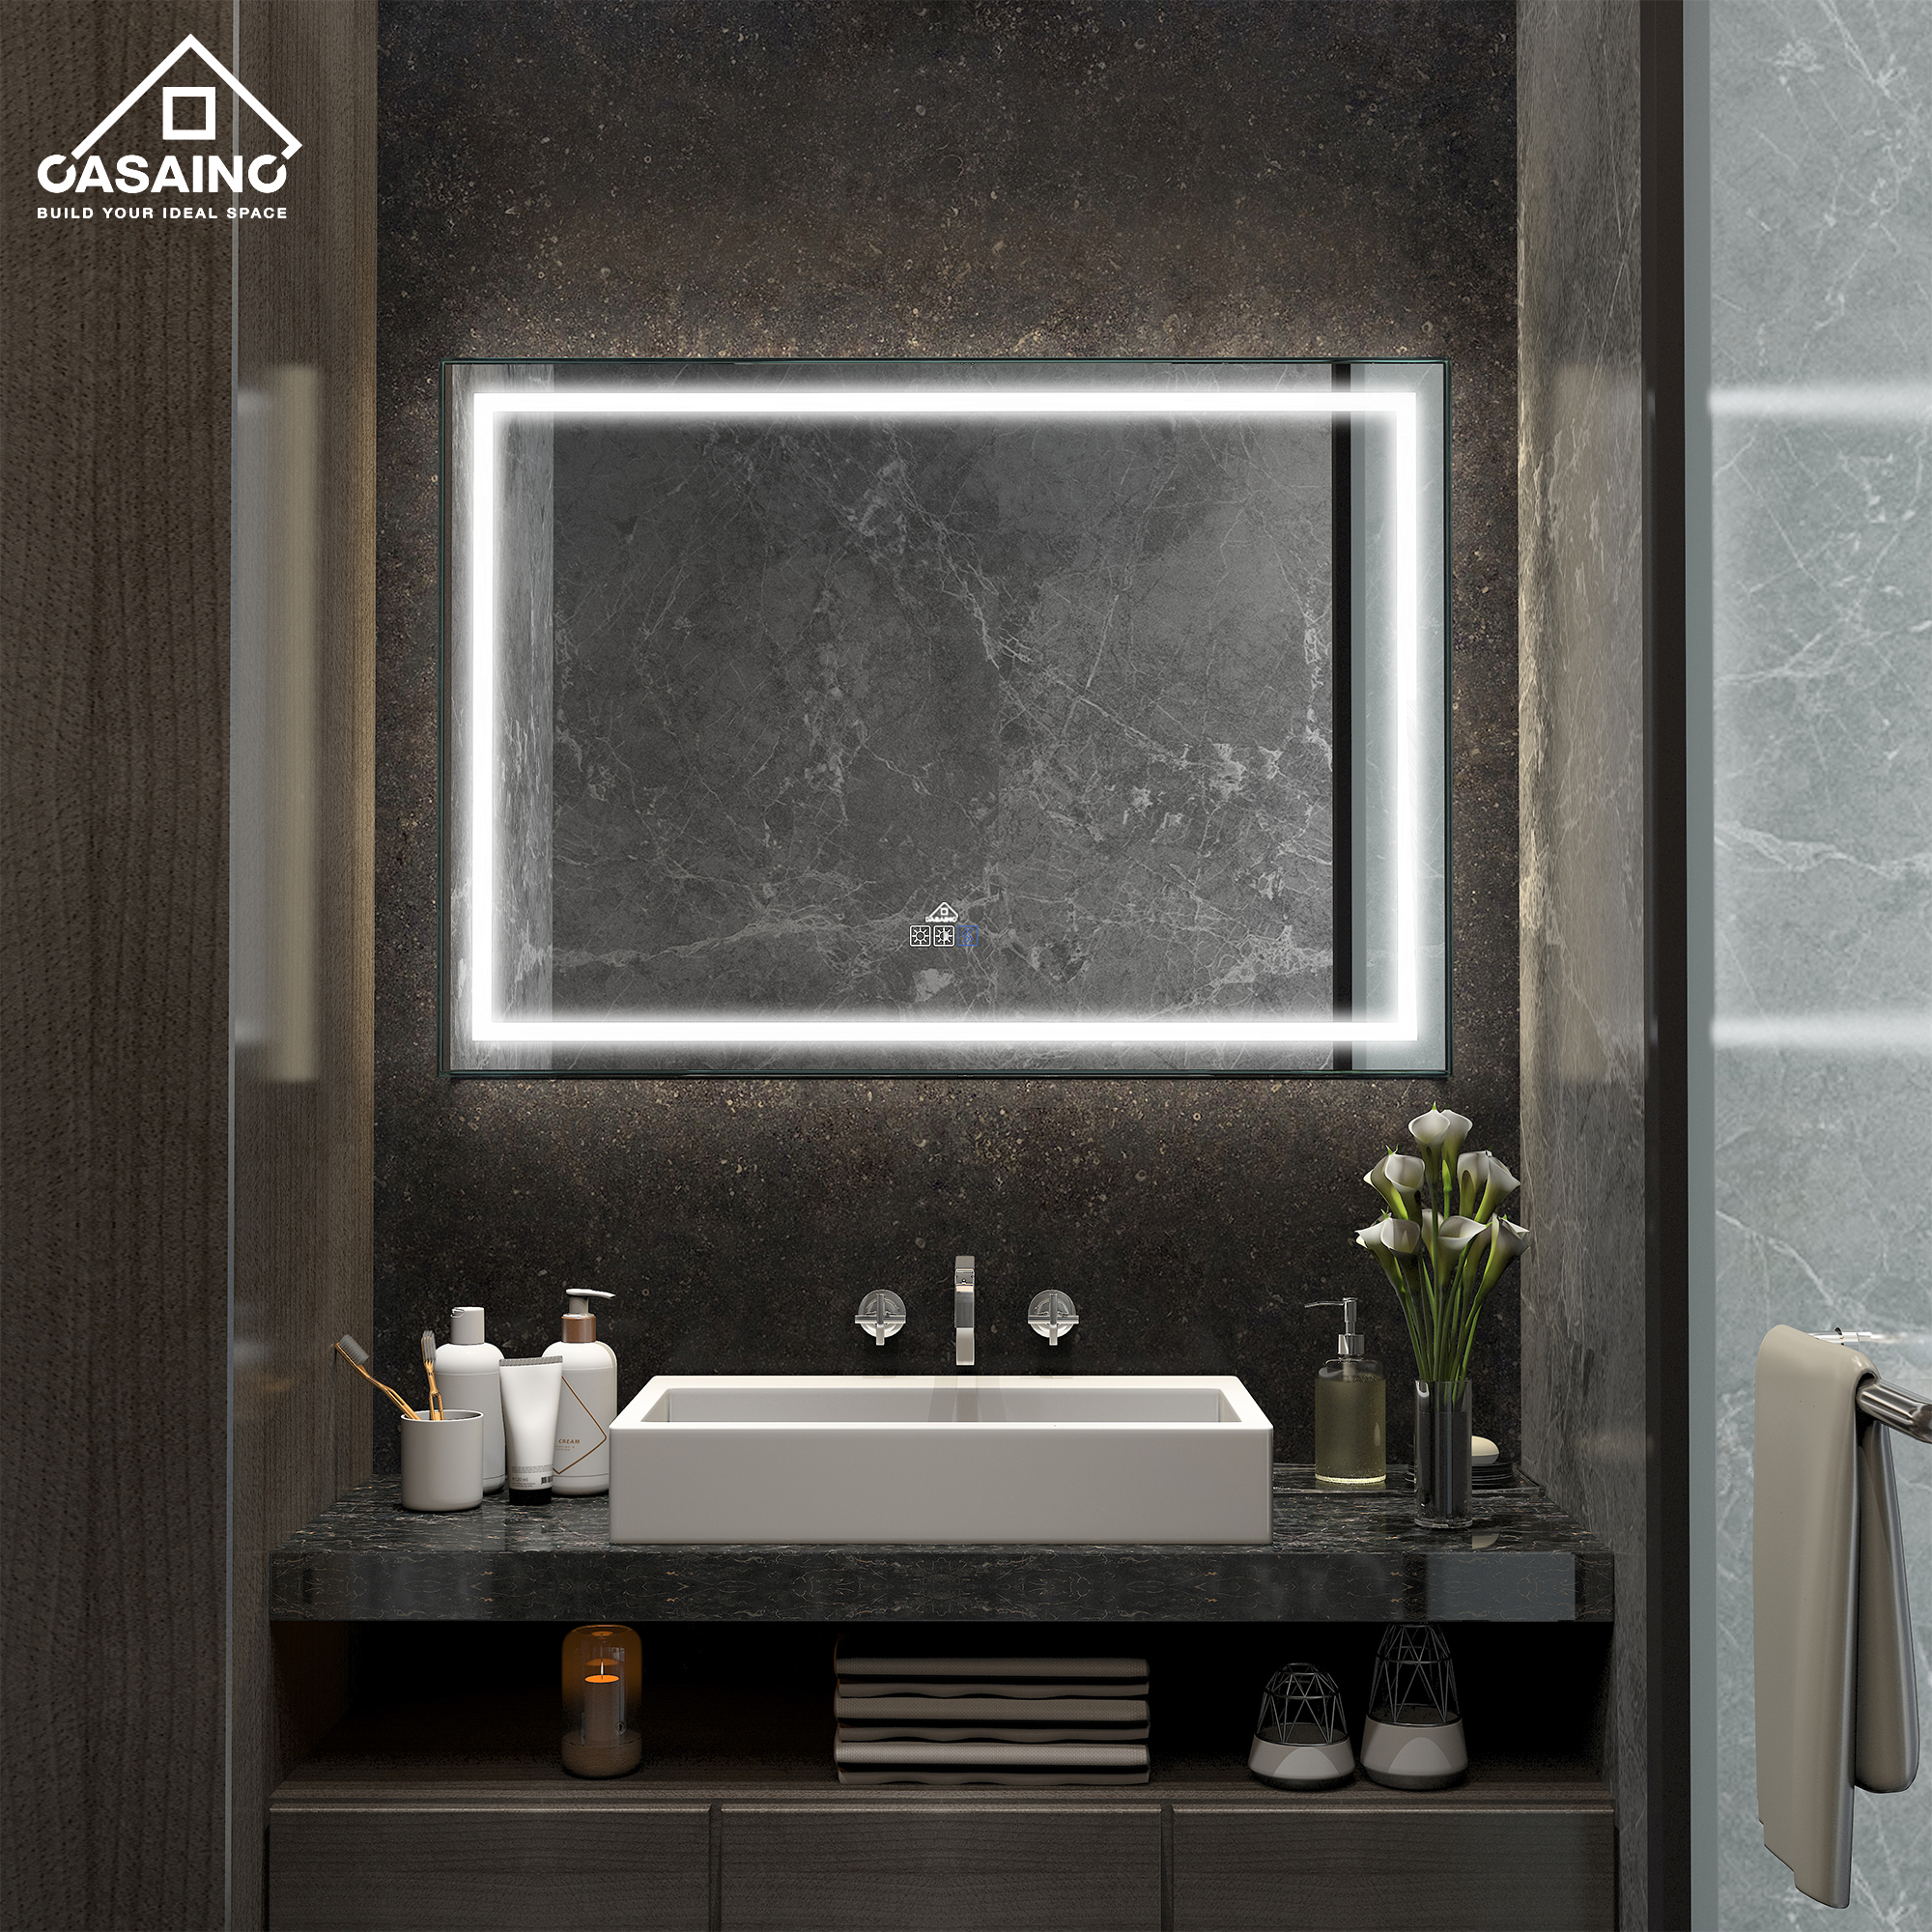 CASAINC Wall Mounted Modern LED Bathroom Mirror, Dimmable and Anti-Fog (48-in L × 36-in W)